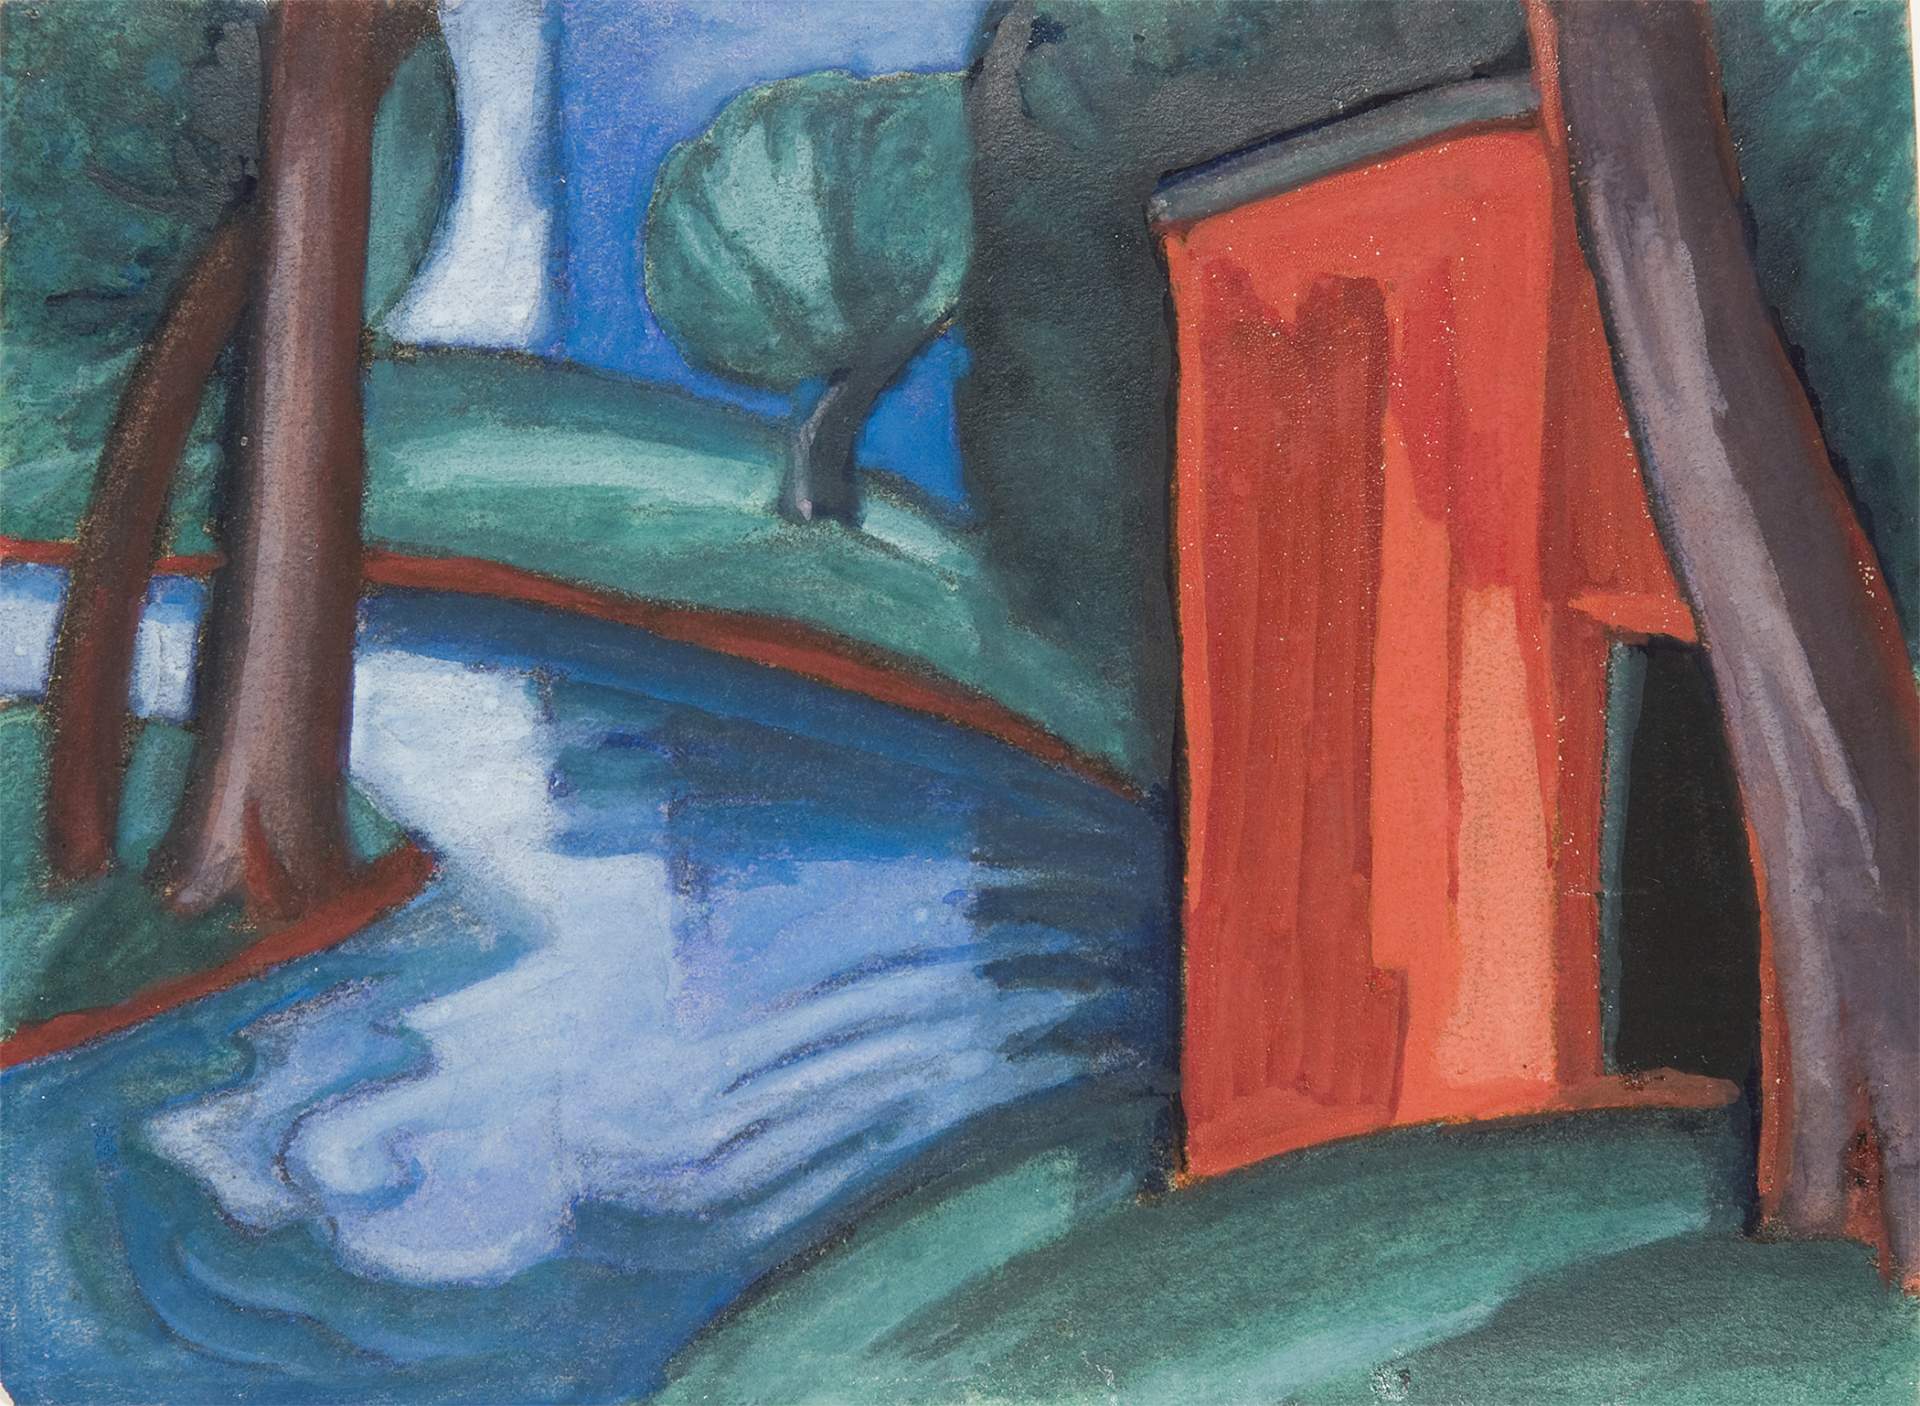 Untitled (Red House by a River)